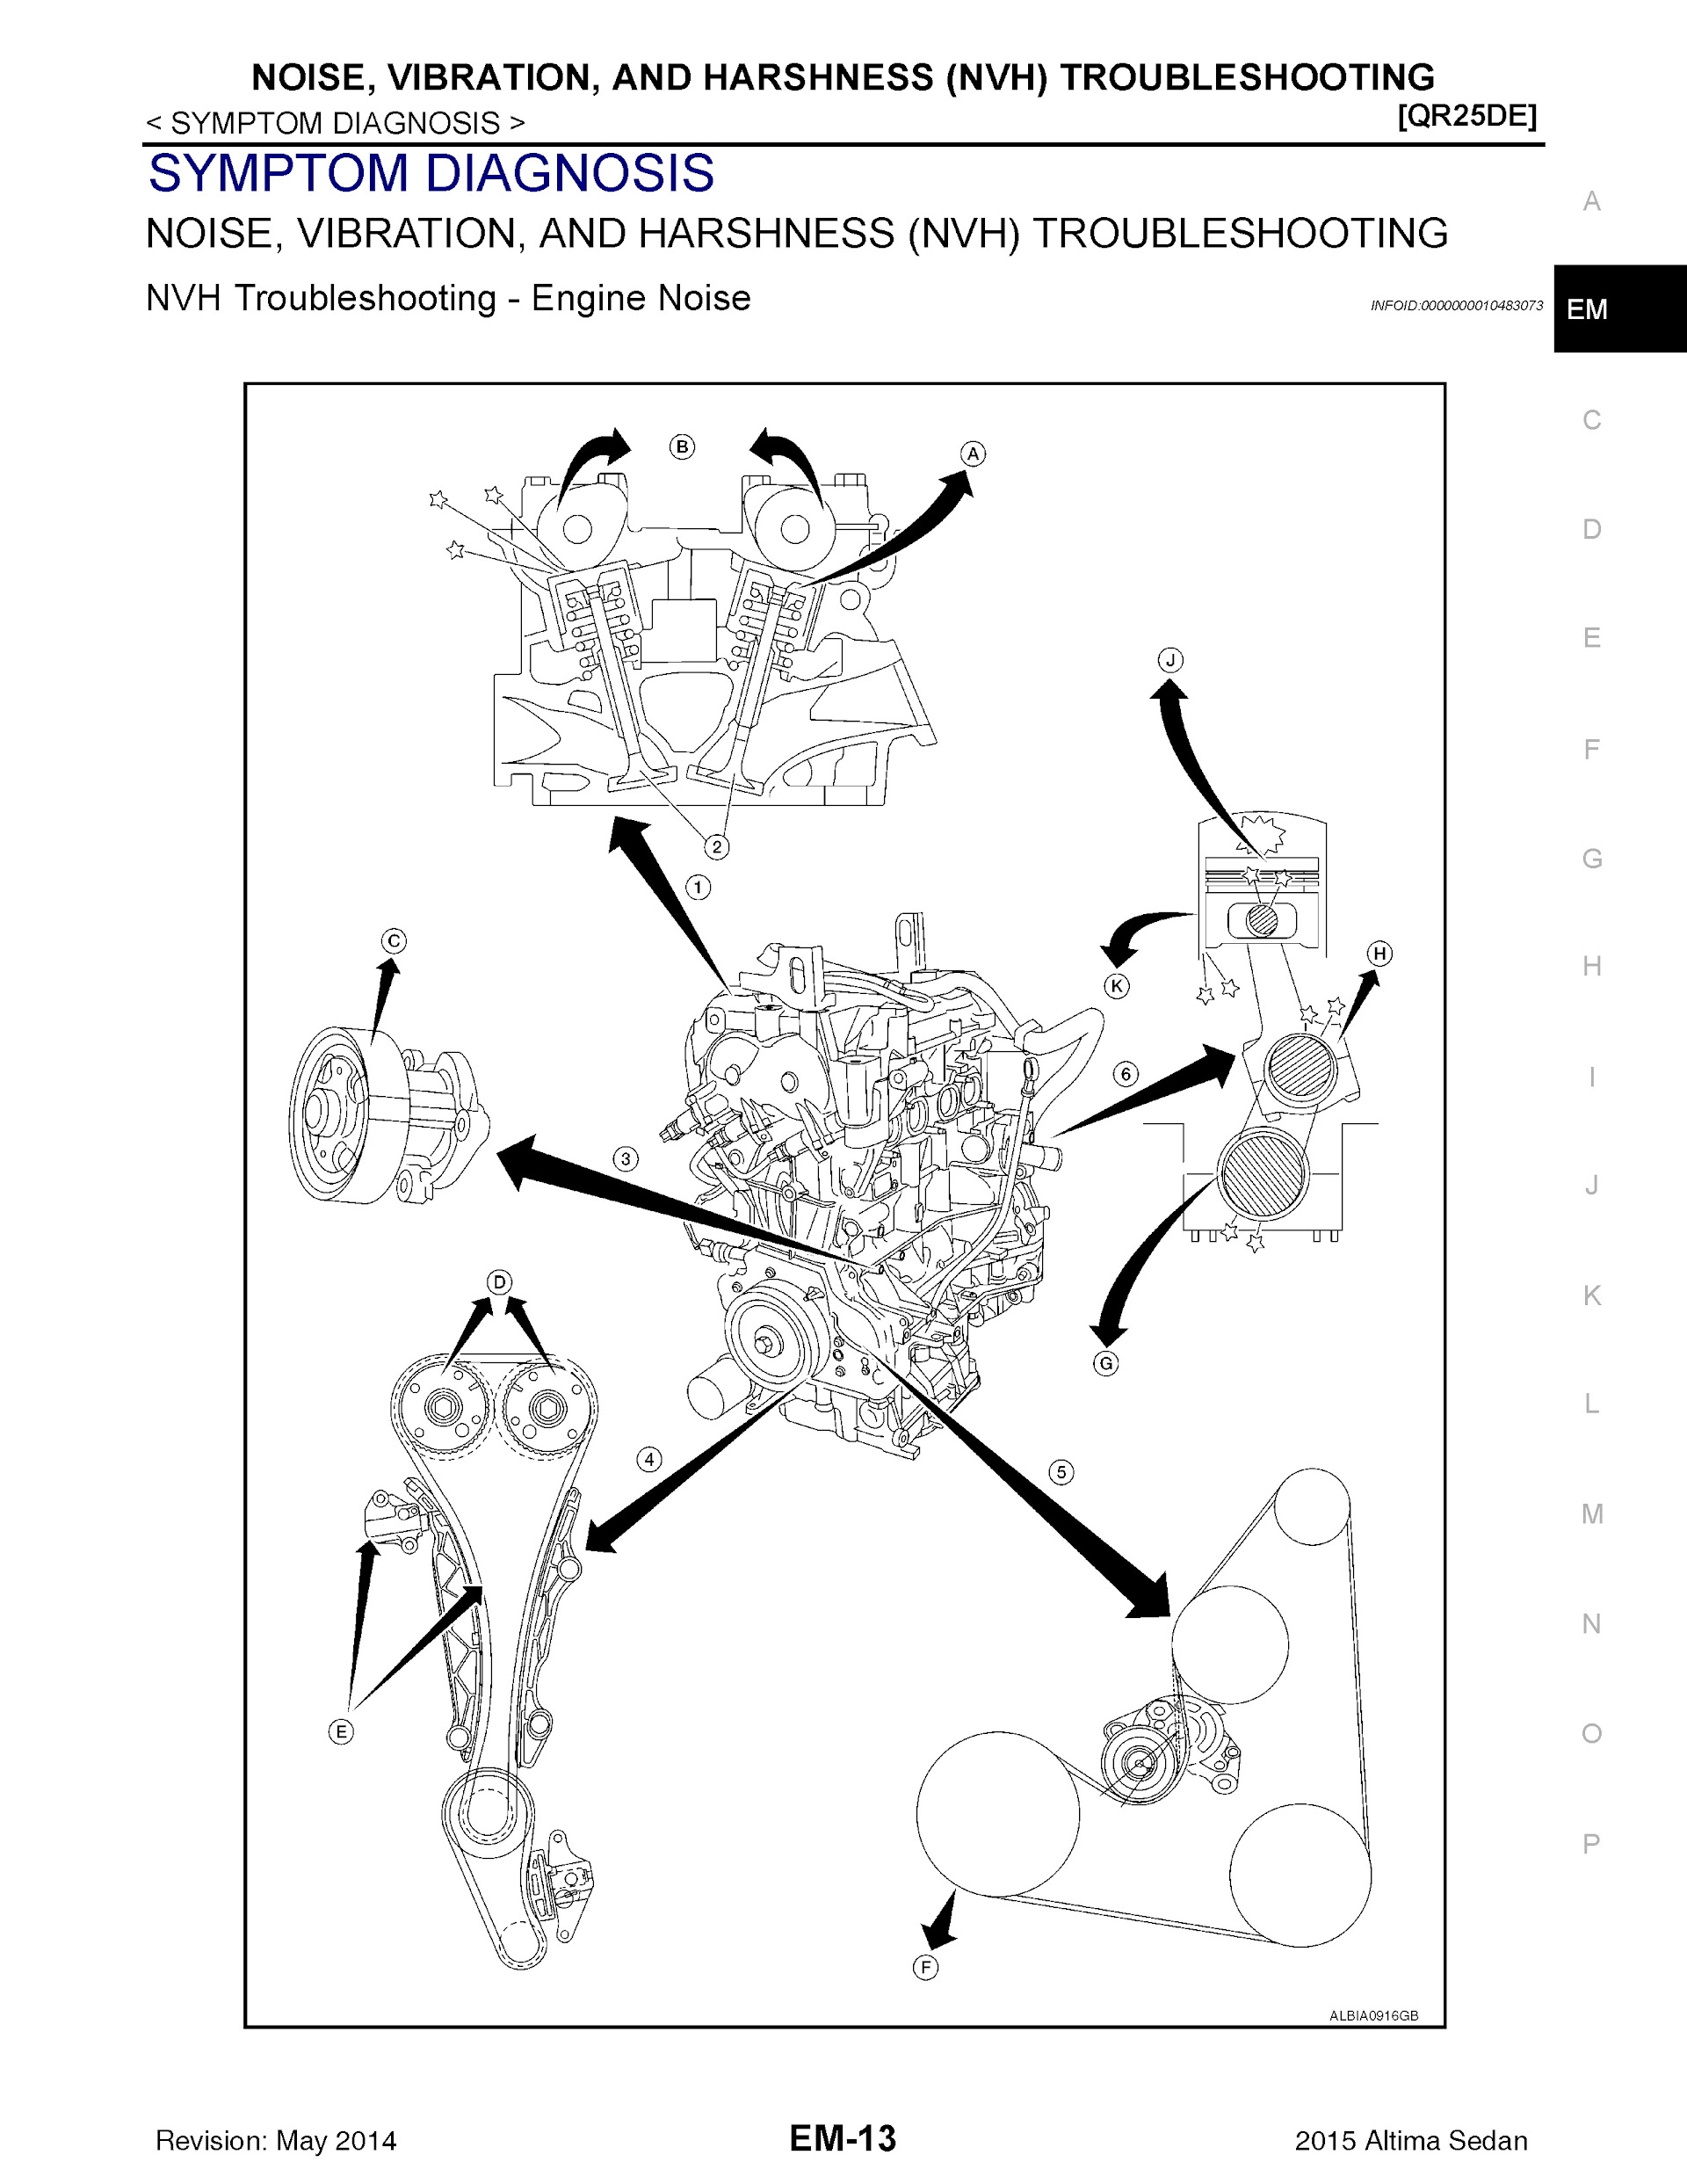 2015 Nissan Altima Repair Manual, Noise, Vibration and Harshness Troubleshooting 